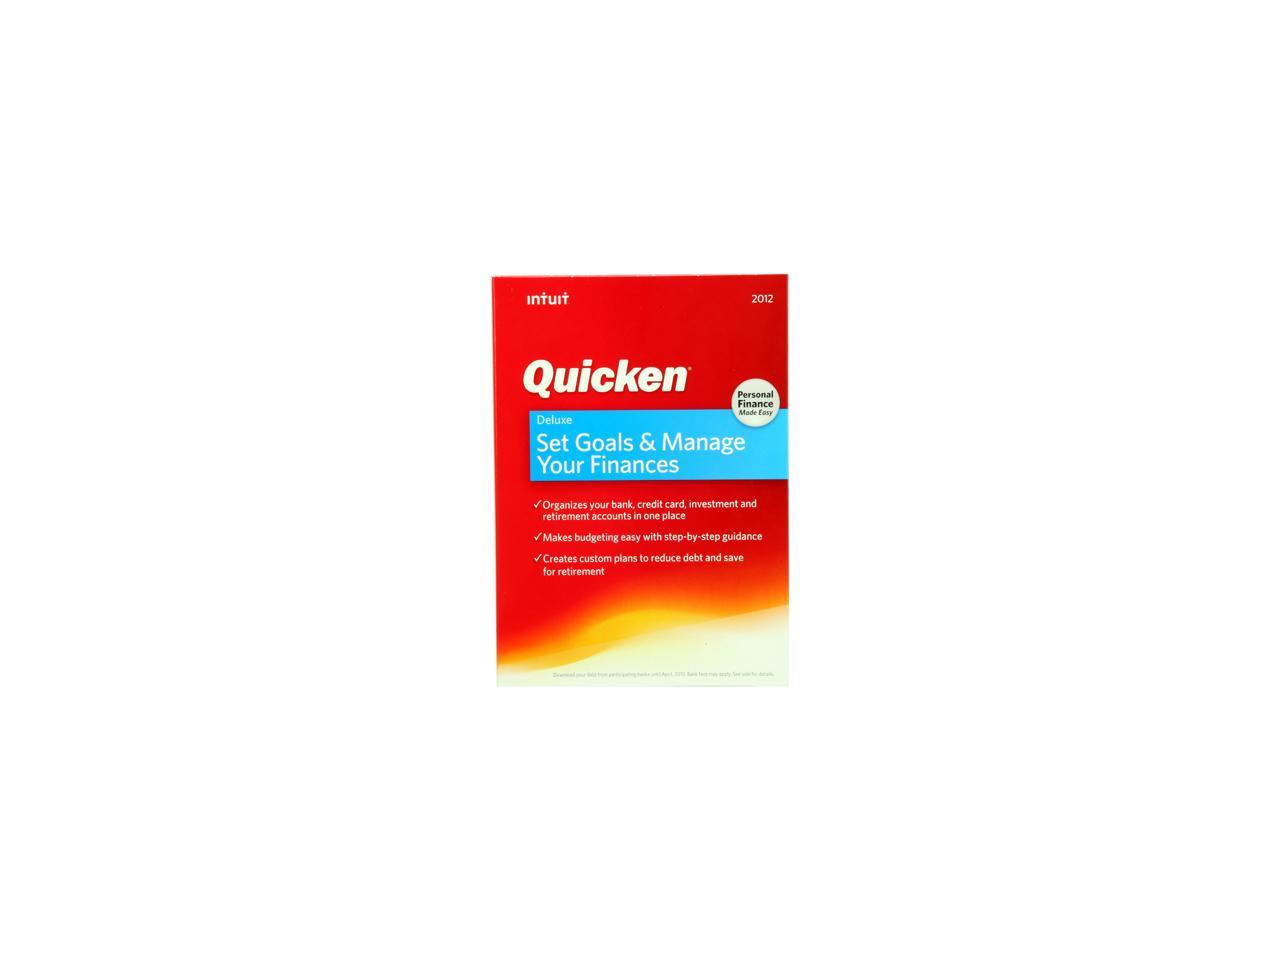 quicken deluxe 2017 download and license